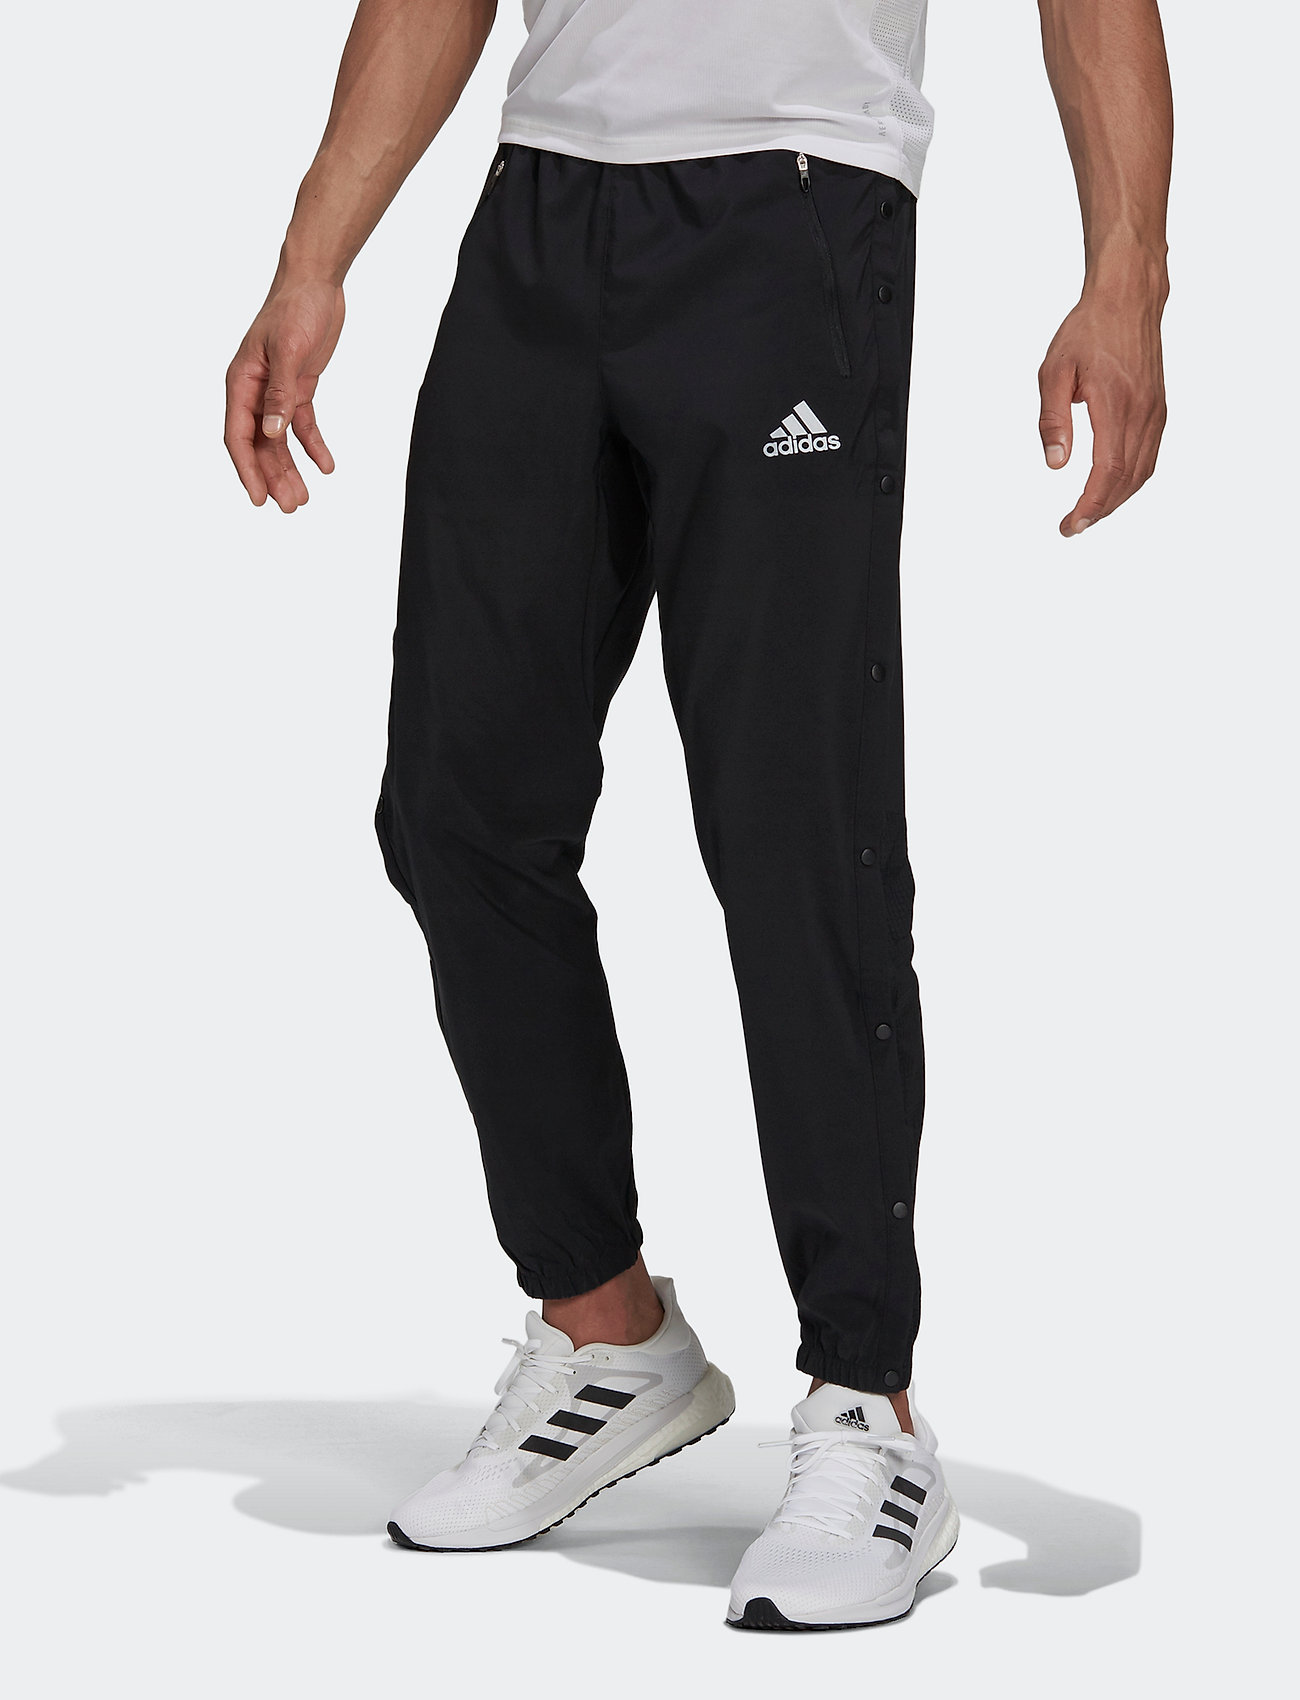 adidas Performance Fast-snap Pants - Trousers | Boozt.com